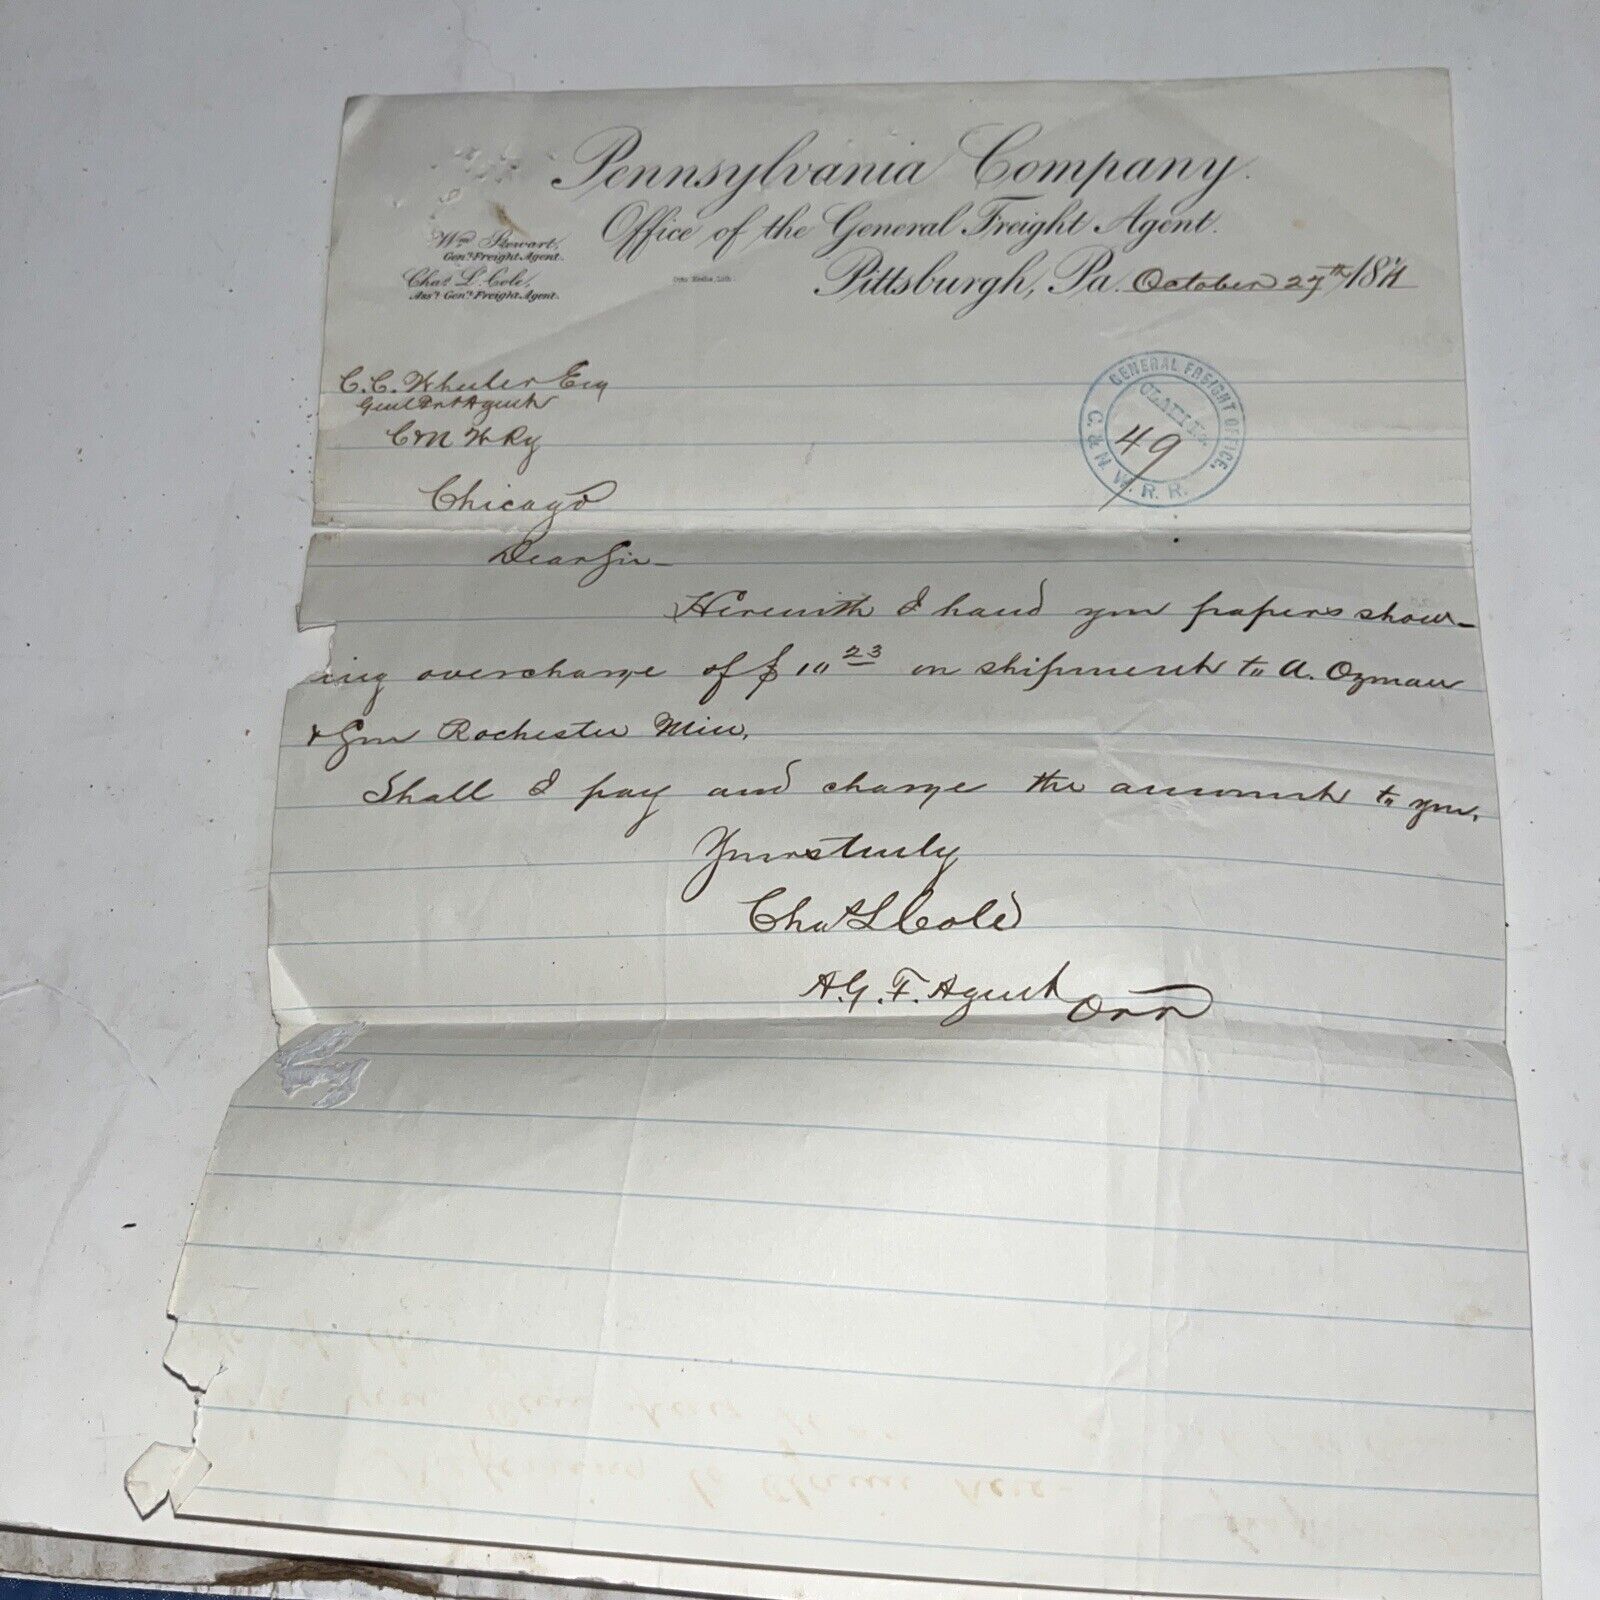 Antique 1871 Letter Pennsylvania Company Office of the General Freight Agent